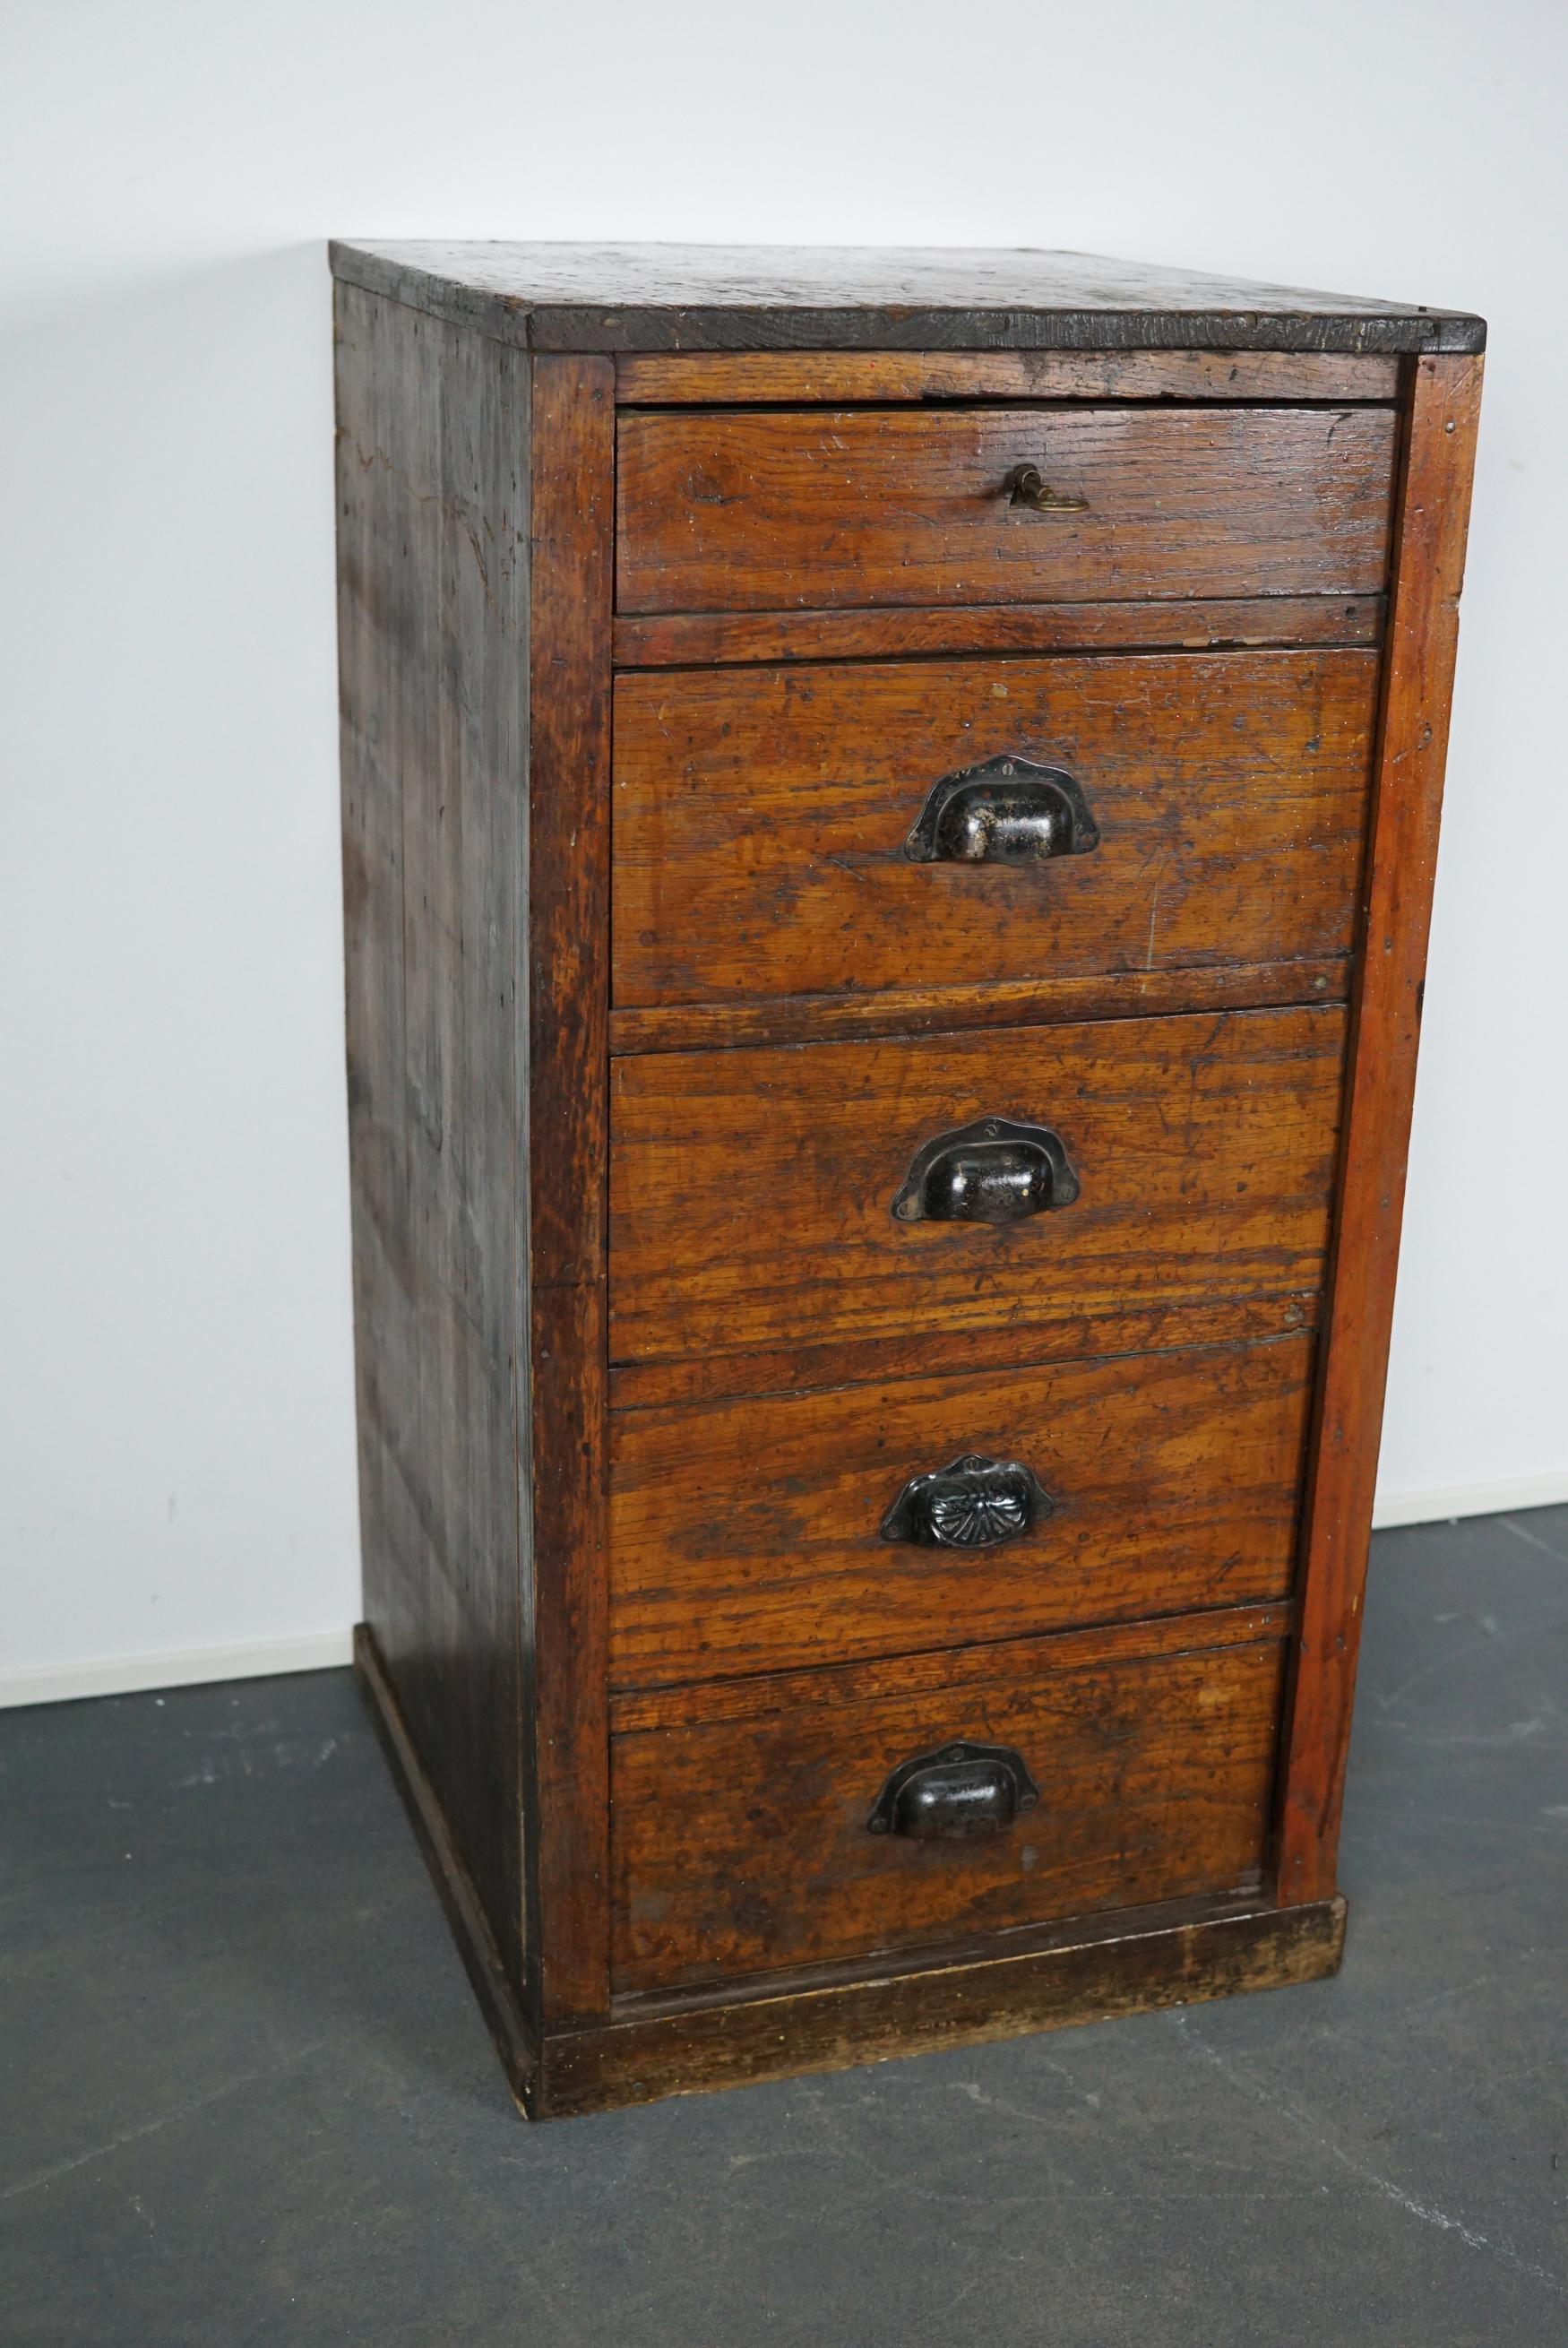 This French workshop cabinet was made circa 1950s in France. It features 5 decent sized drawers with metal cup handles. It is made from pine and oak.